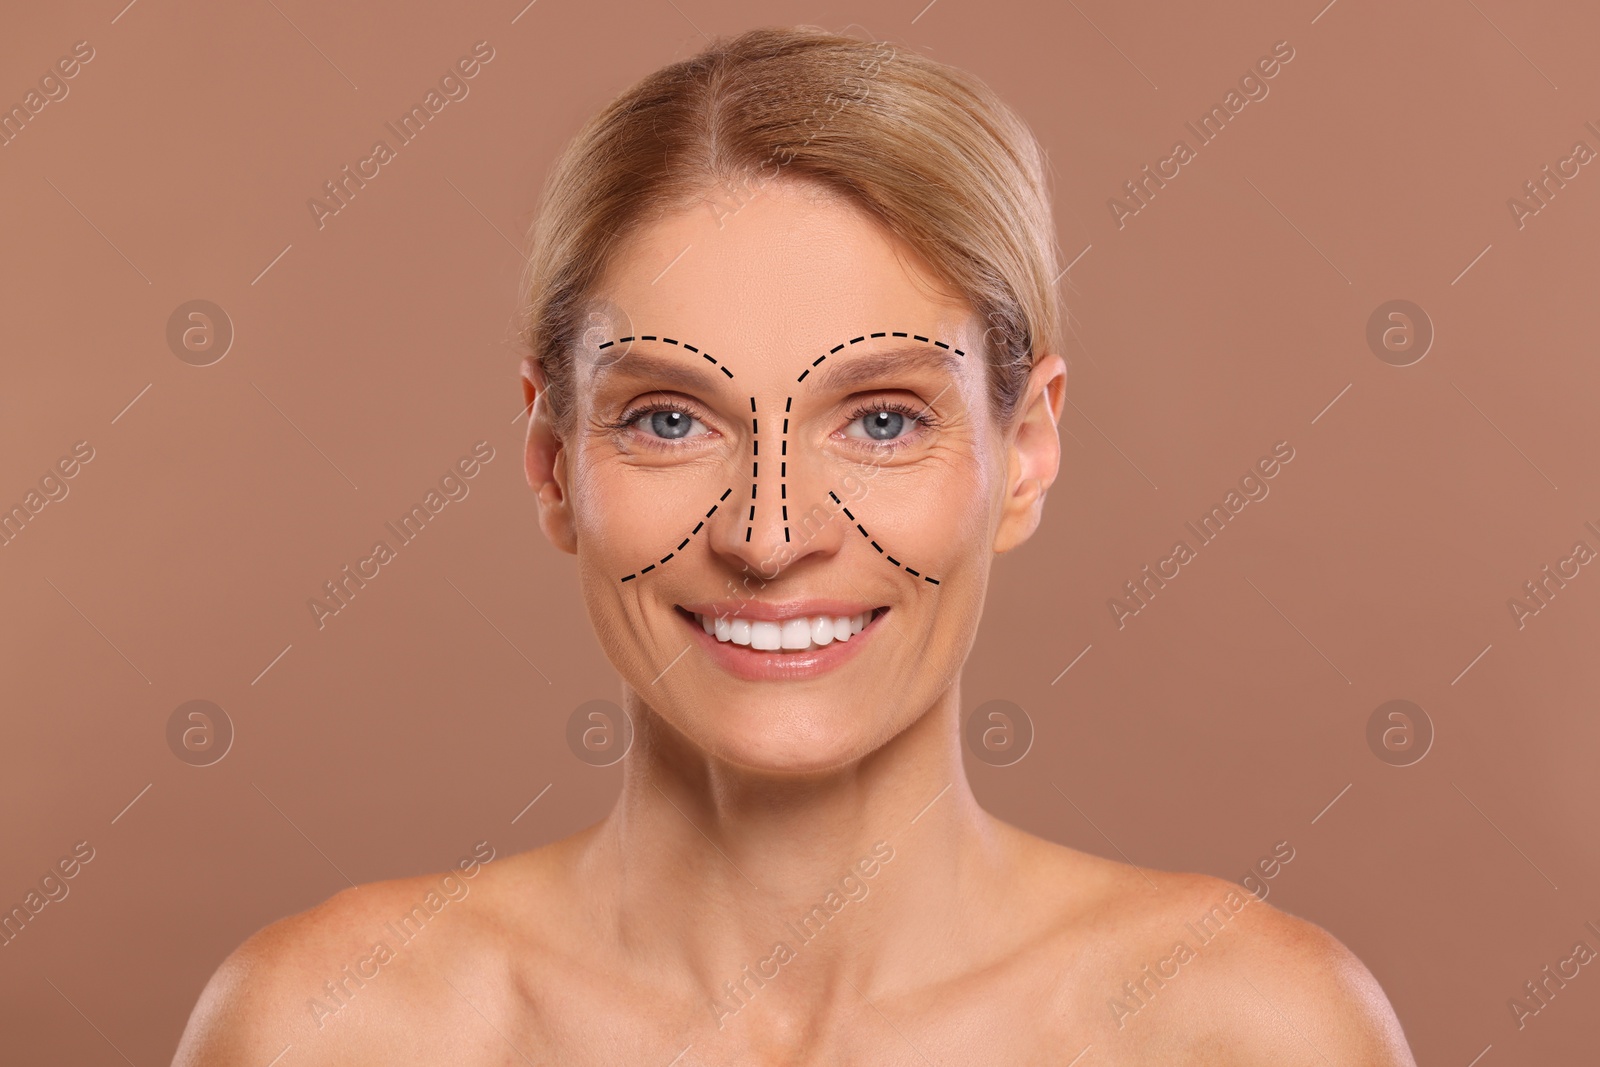 Image of Woman with markings for cosmetic surgery on her face against light brown background